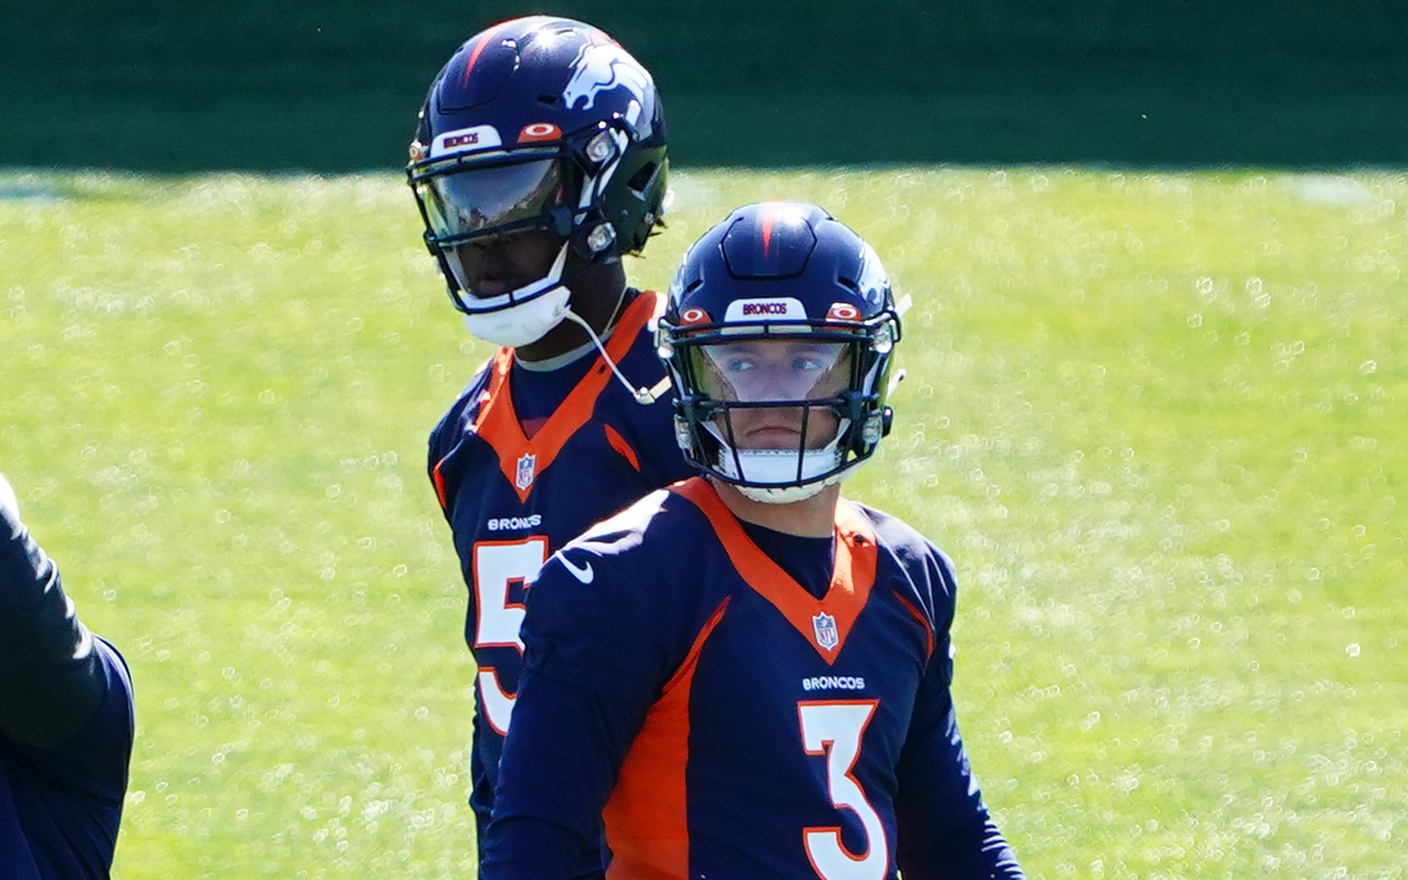 Teddy Bridgewater looks over Drew Lock's shoulder on Day 1 of OTAs in Denver. Credit: Ron Chenoy, USA TODAY Sports.